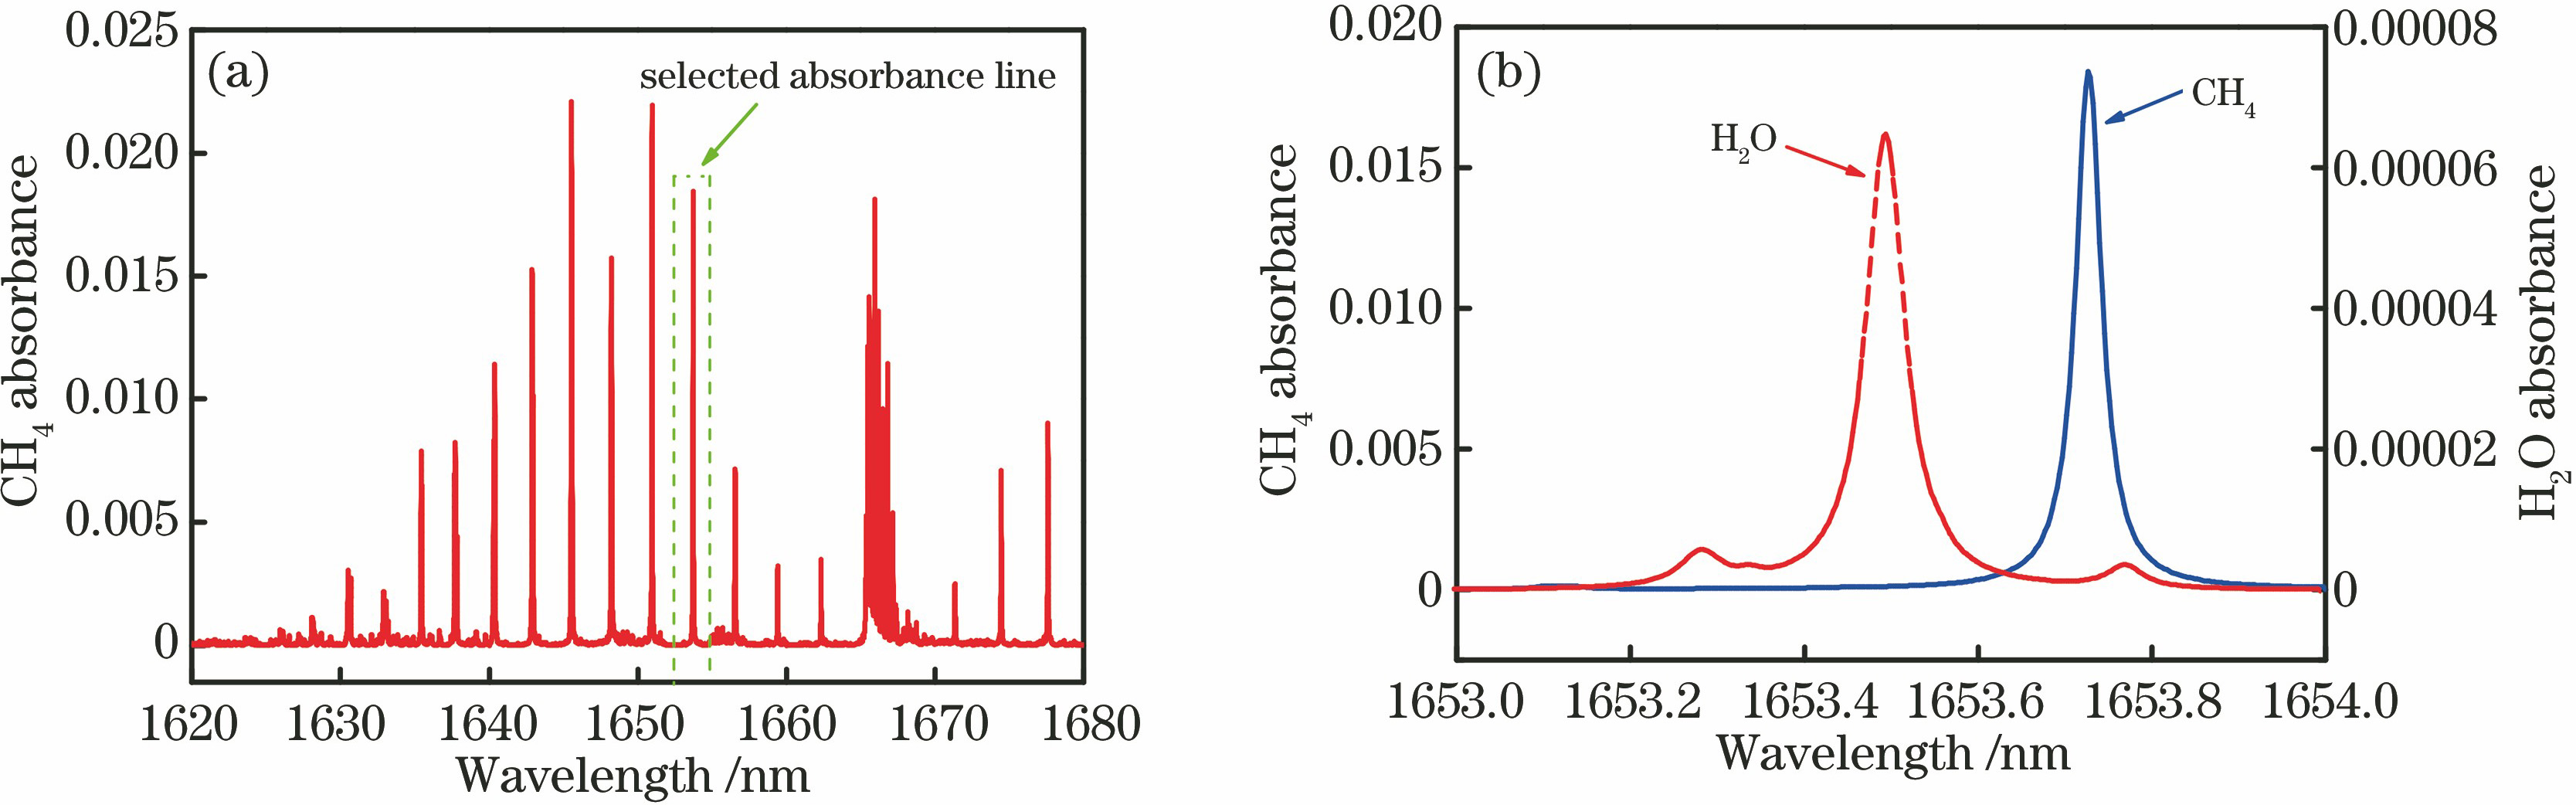 Absorption spectra of CH4 and H2O at standard atmospheric pressure and 1 cm optical path length. (a) Absorption spectra of CH4 (volume fraction of 5×10-4) in the range of 1620-1680 nm; (b) absorption spectra of H2O (volume fraction of 1%) and CH4 (volume fraction of 5×10-4) in the range of 1653-1654 nm